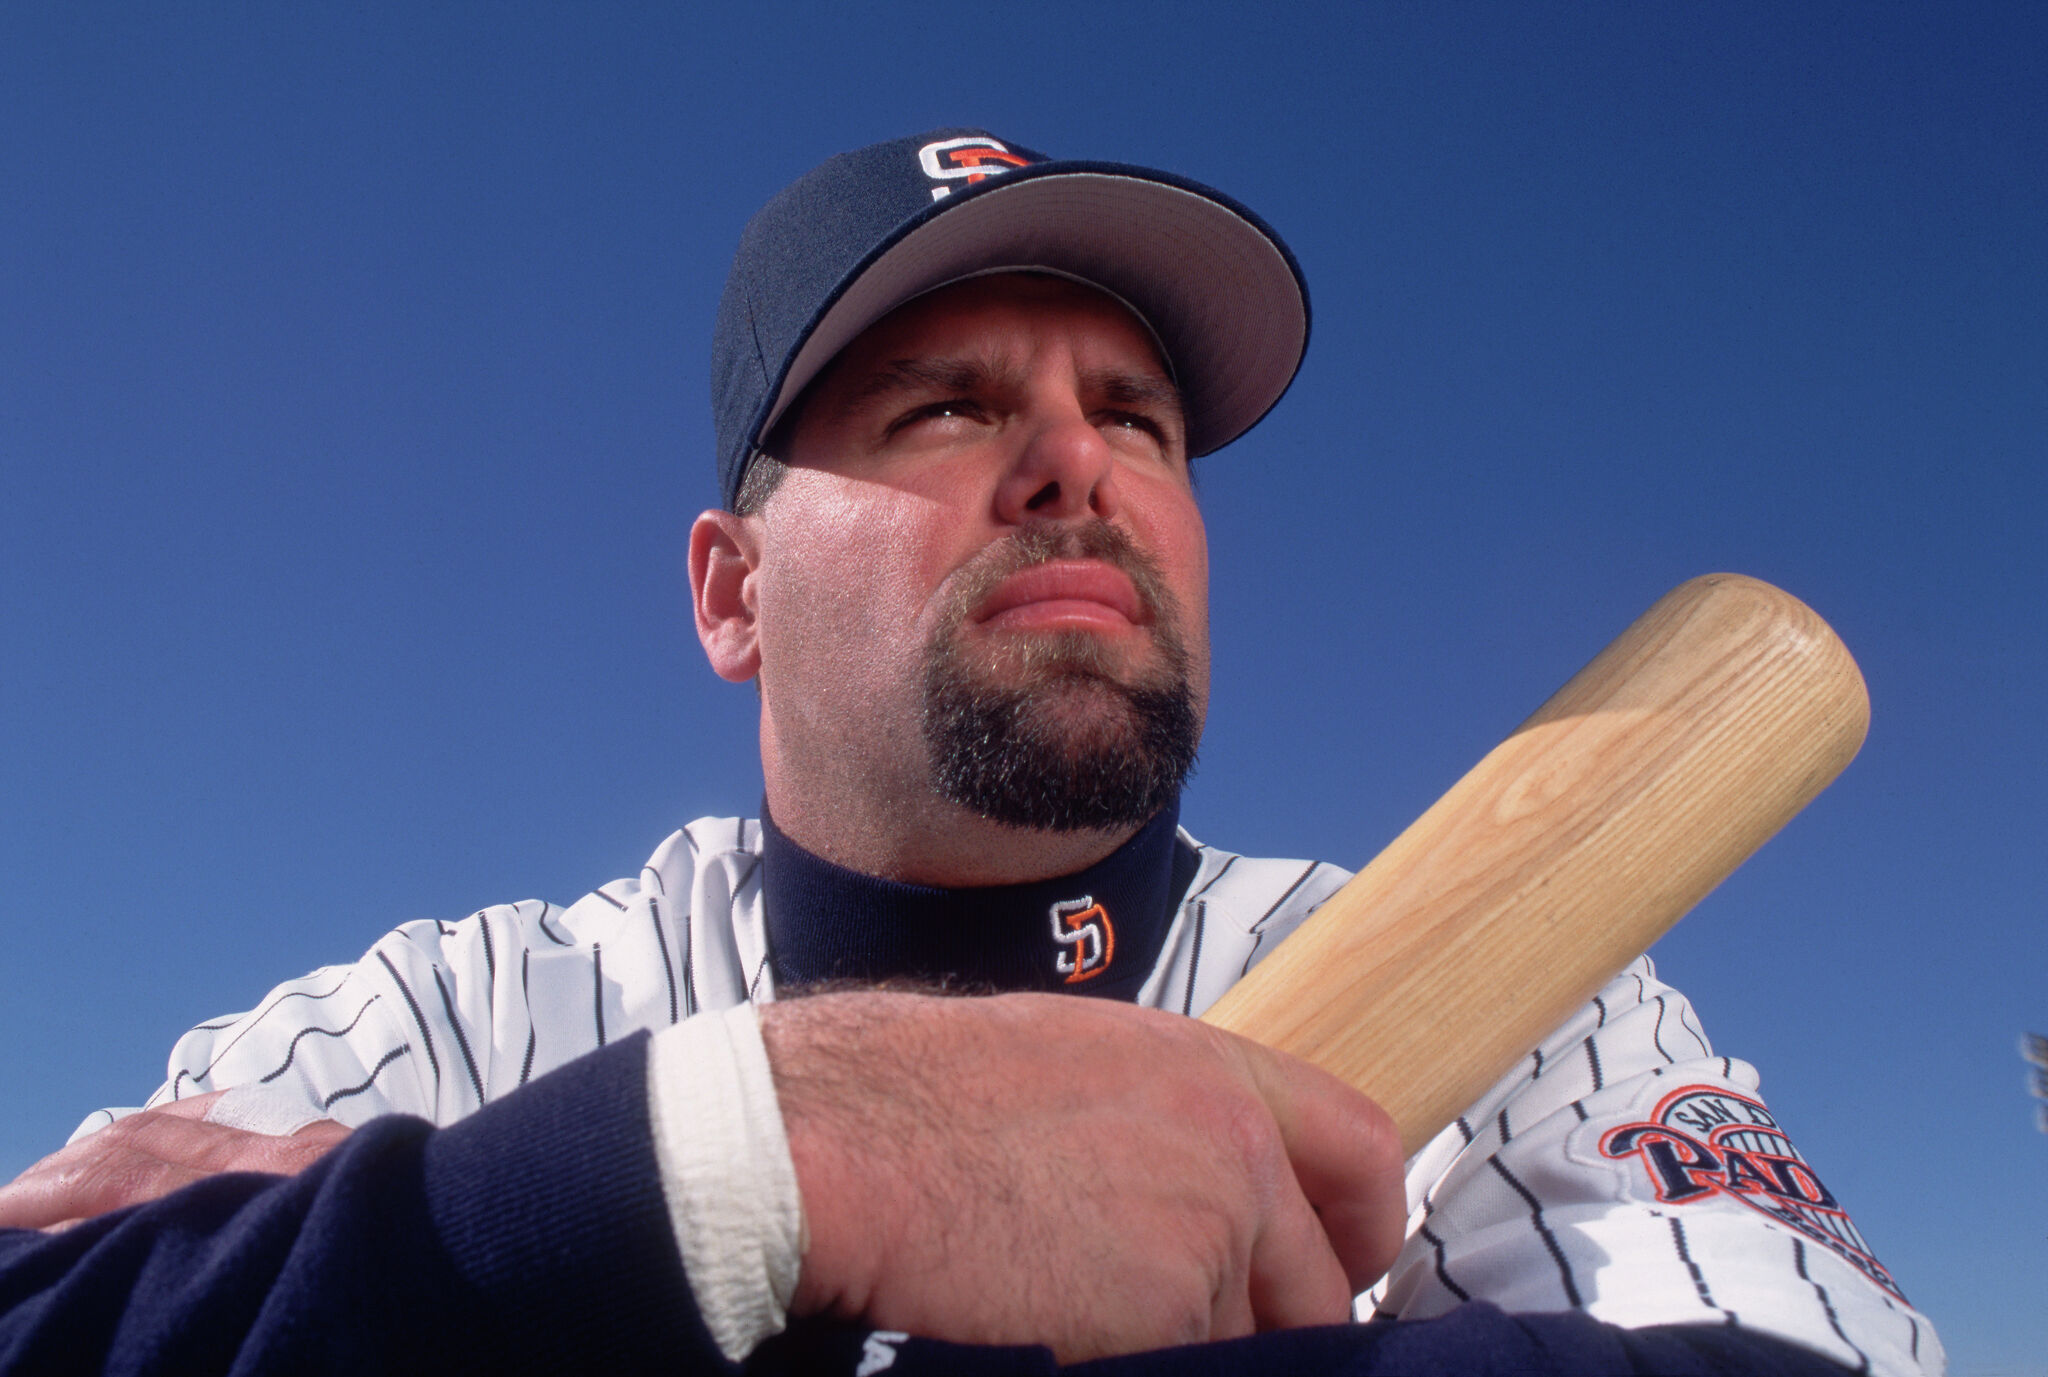 New book reveals Ken Caminiti was victim of childhood sexual abuse